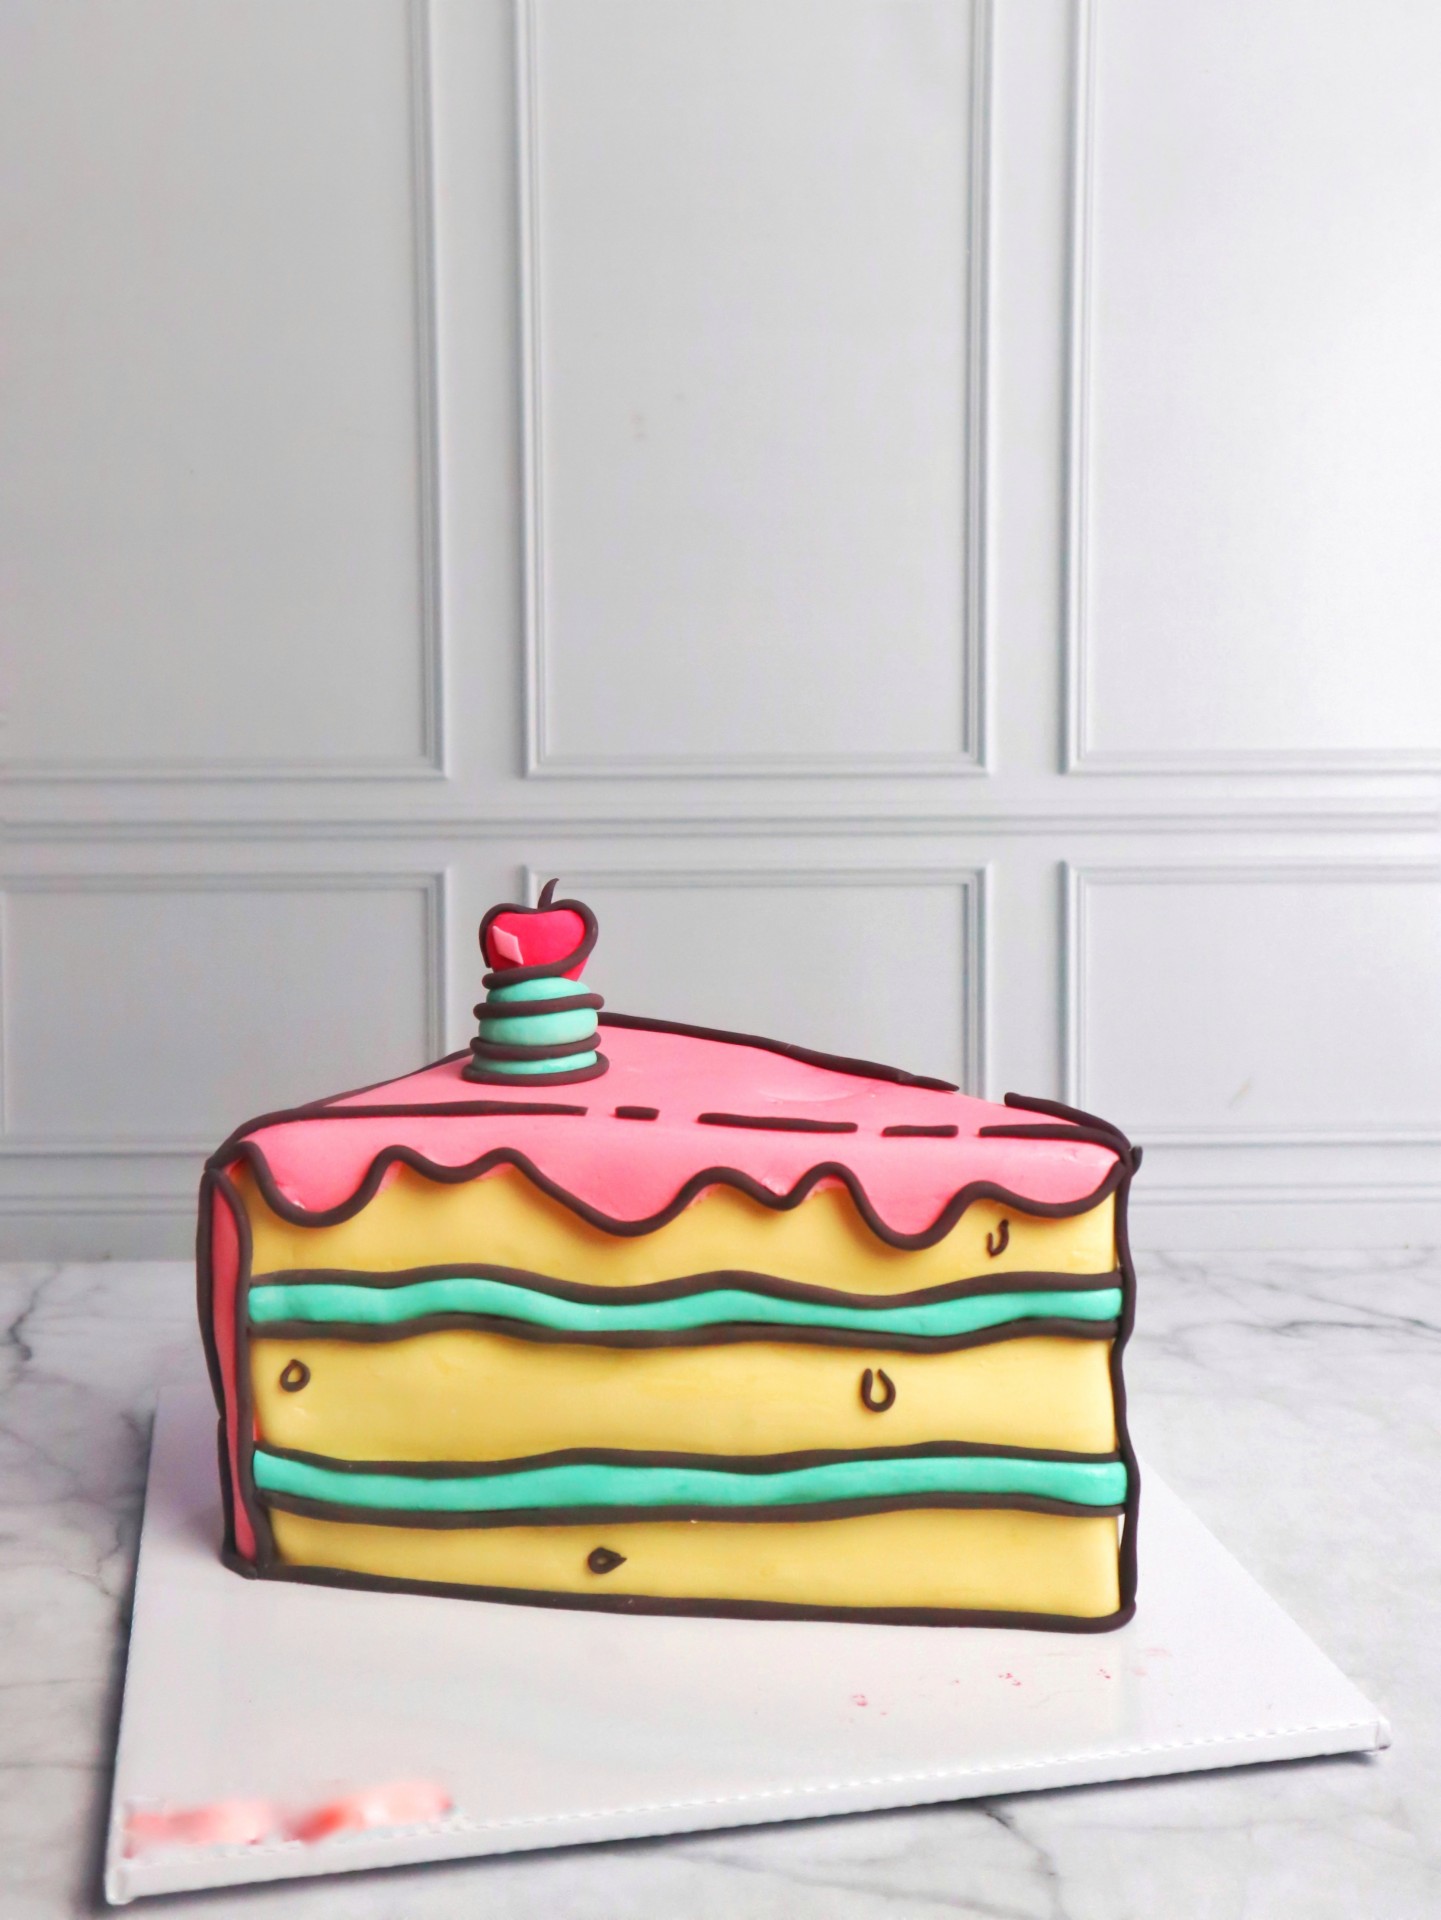 Join the TikTok trend and learn how to make your own cartoon cakes! – 614NOW